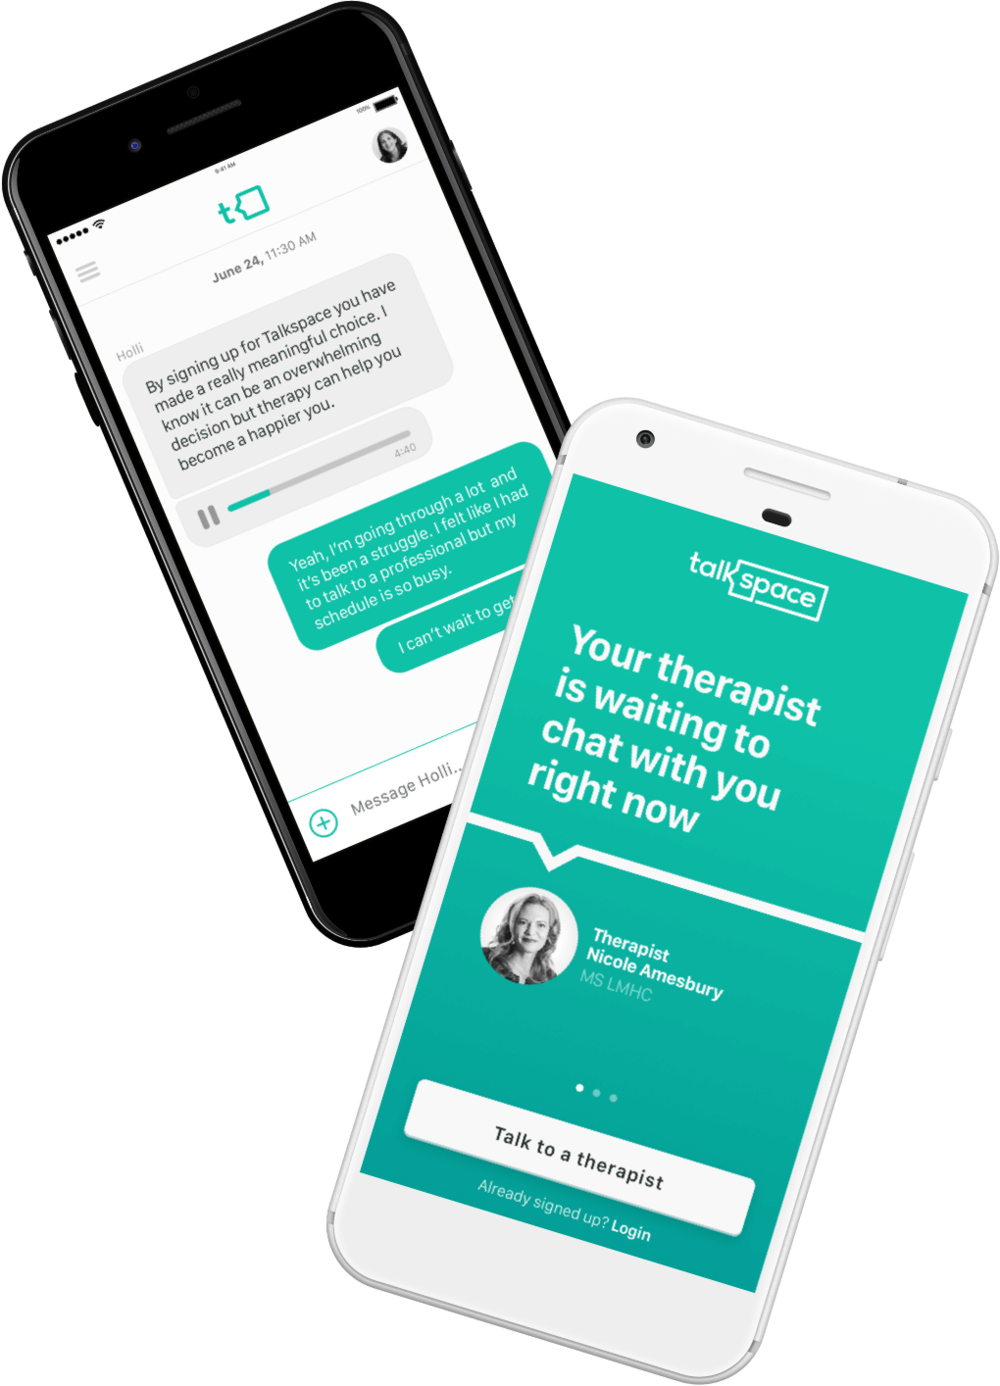 10 Handy Hints For Starting Out As a Mobile Therapist 2